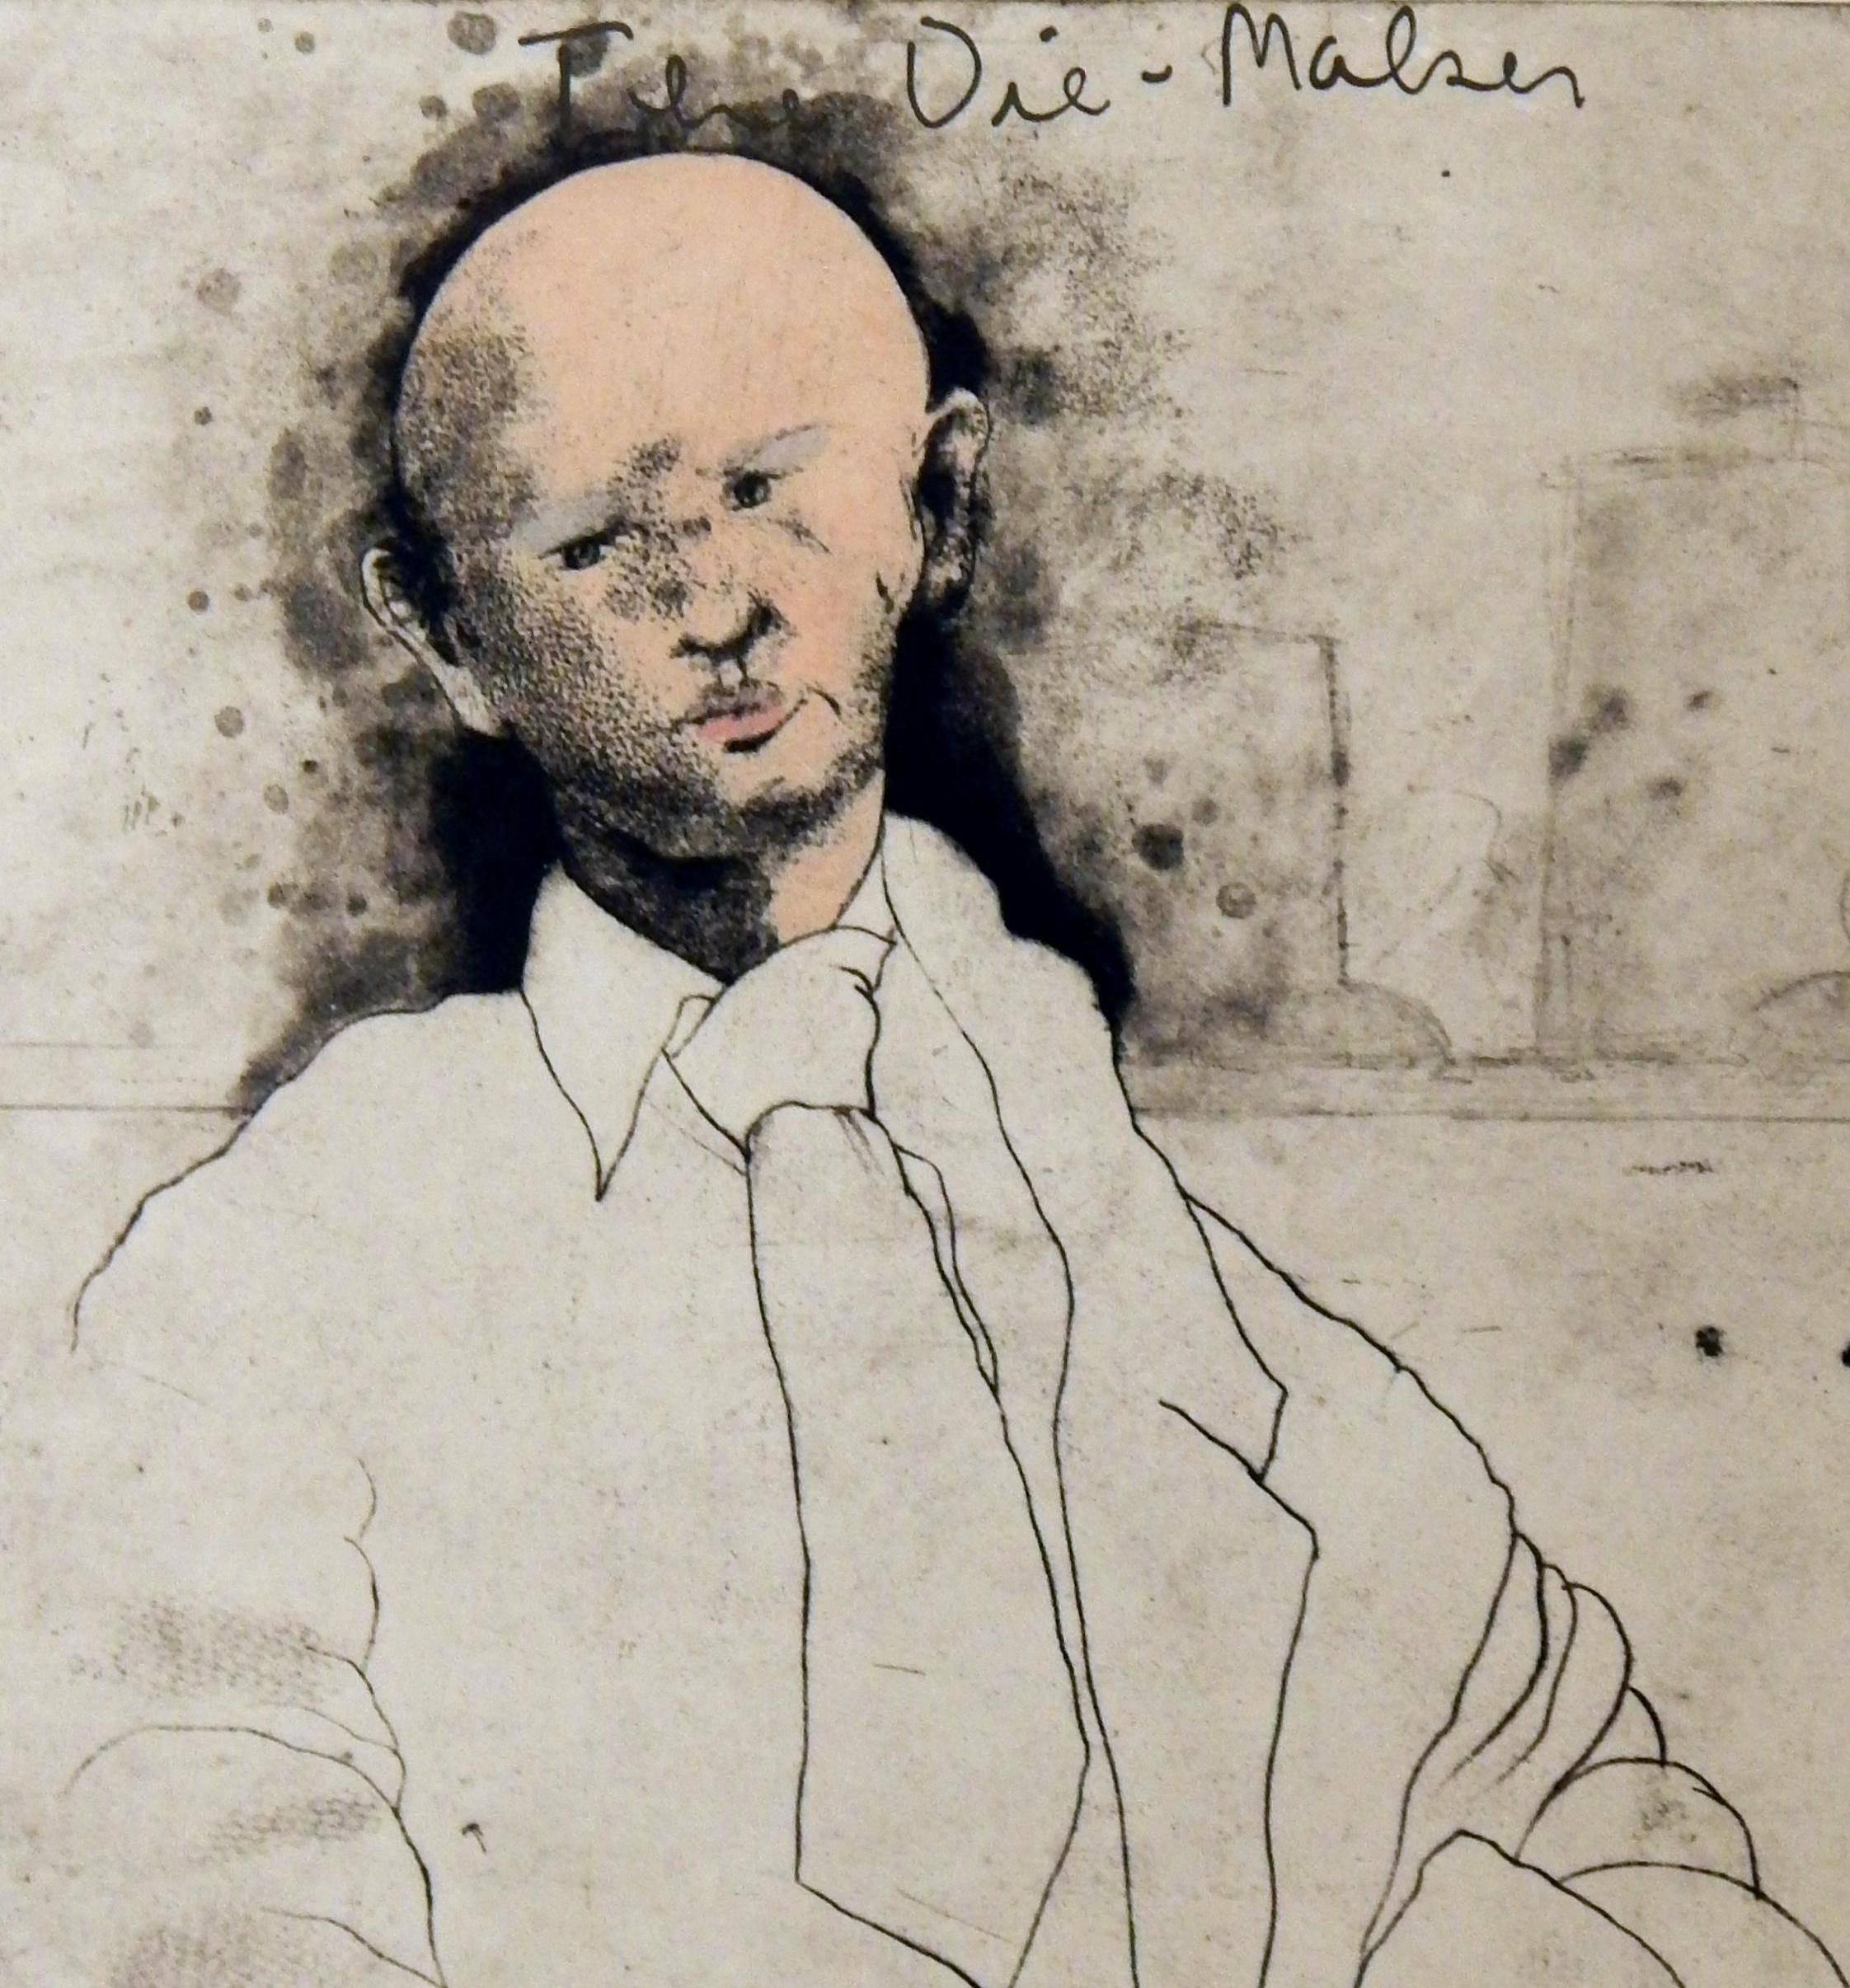 Jim Dine (b. 1935) original etching, hand colored created 1976.
This work is an artist's proof on a full sheet with deckle edges.
It is a self-portrait of the artist and is titled: 